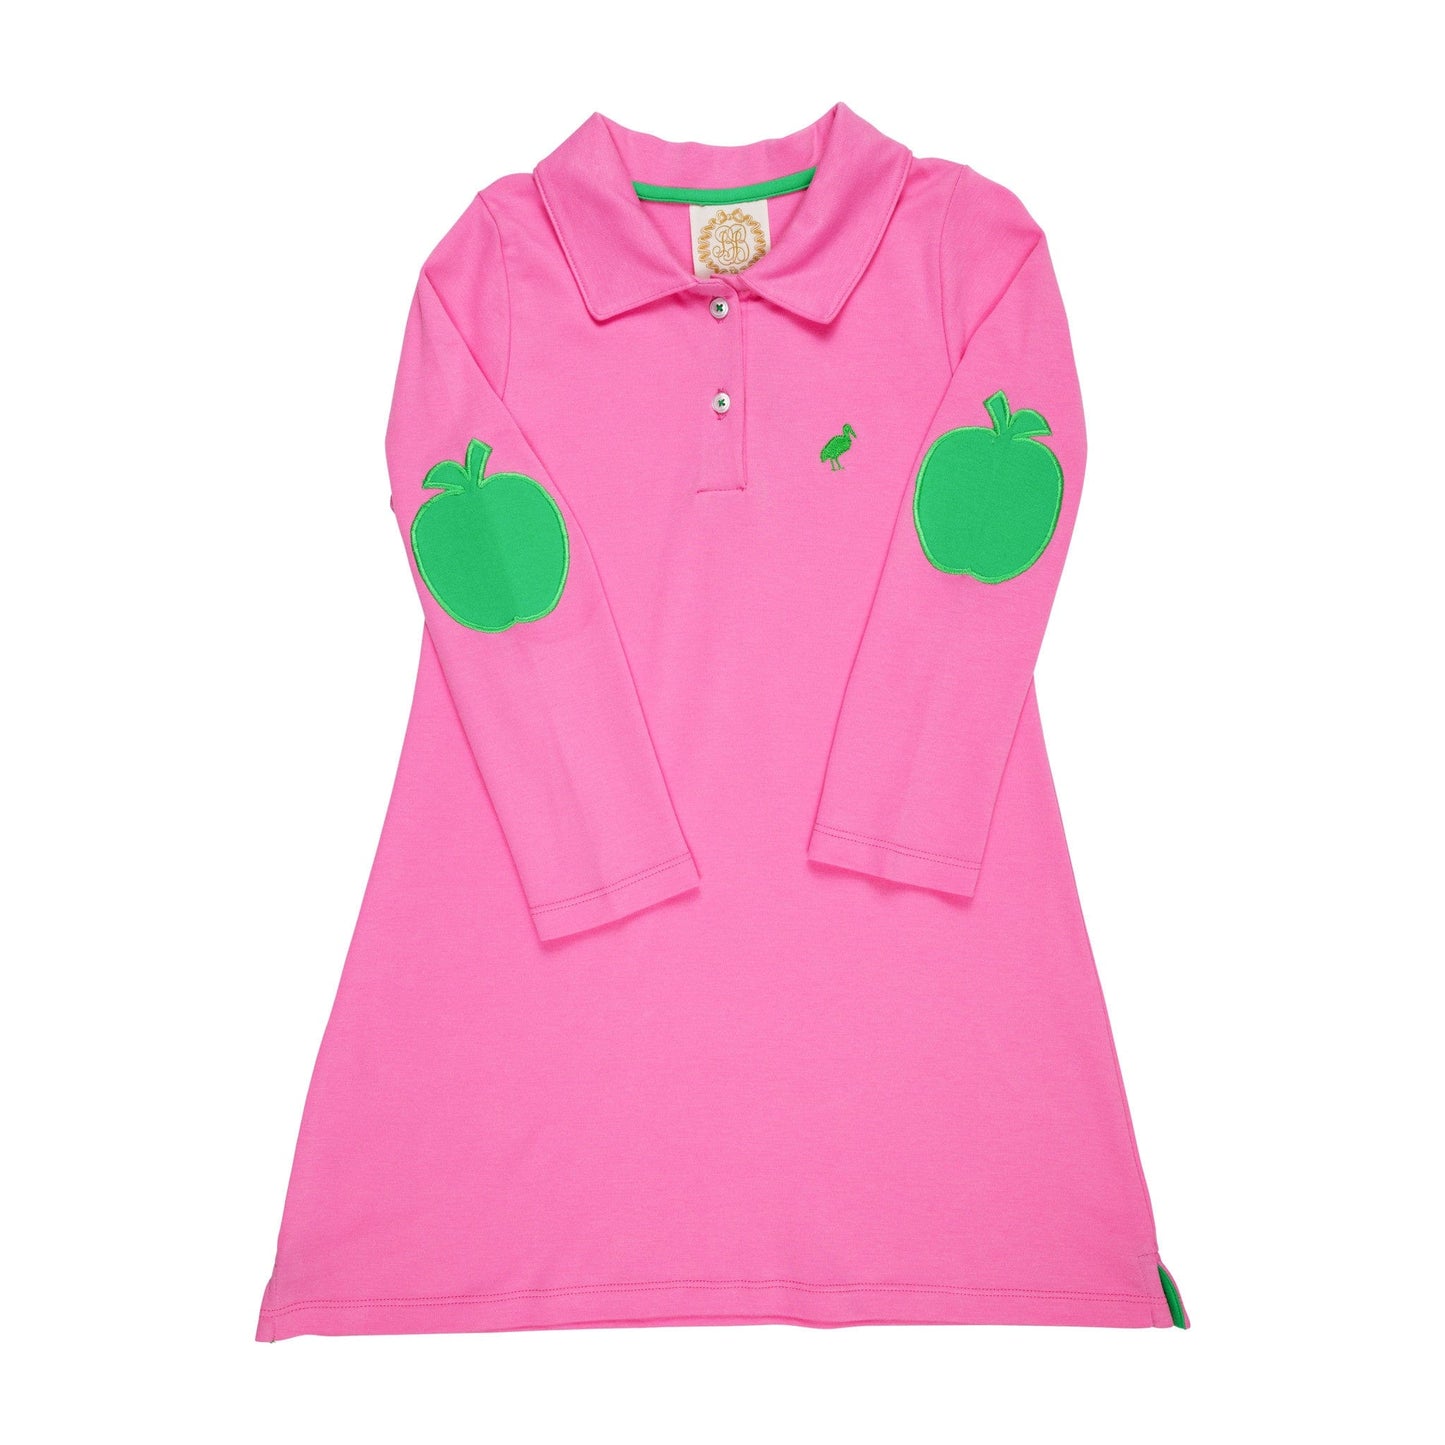 Beaufort Bonnet Company Pink Polo dress with green apple